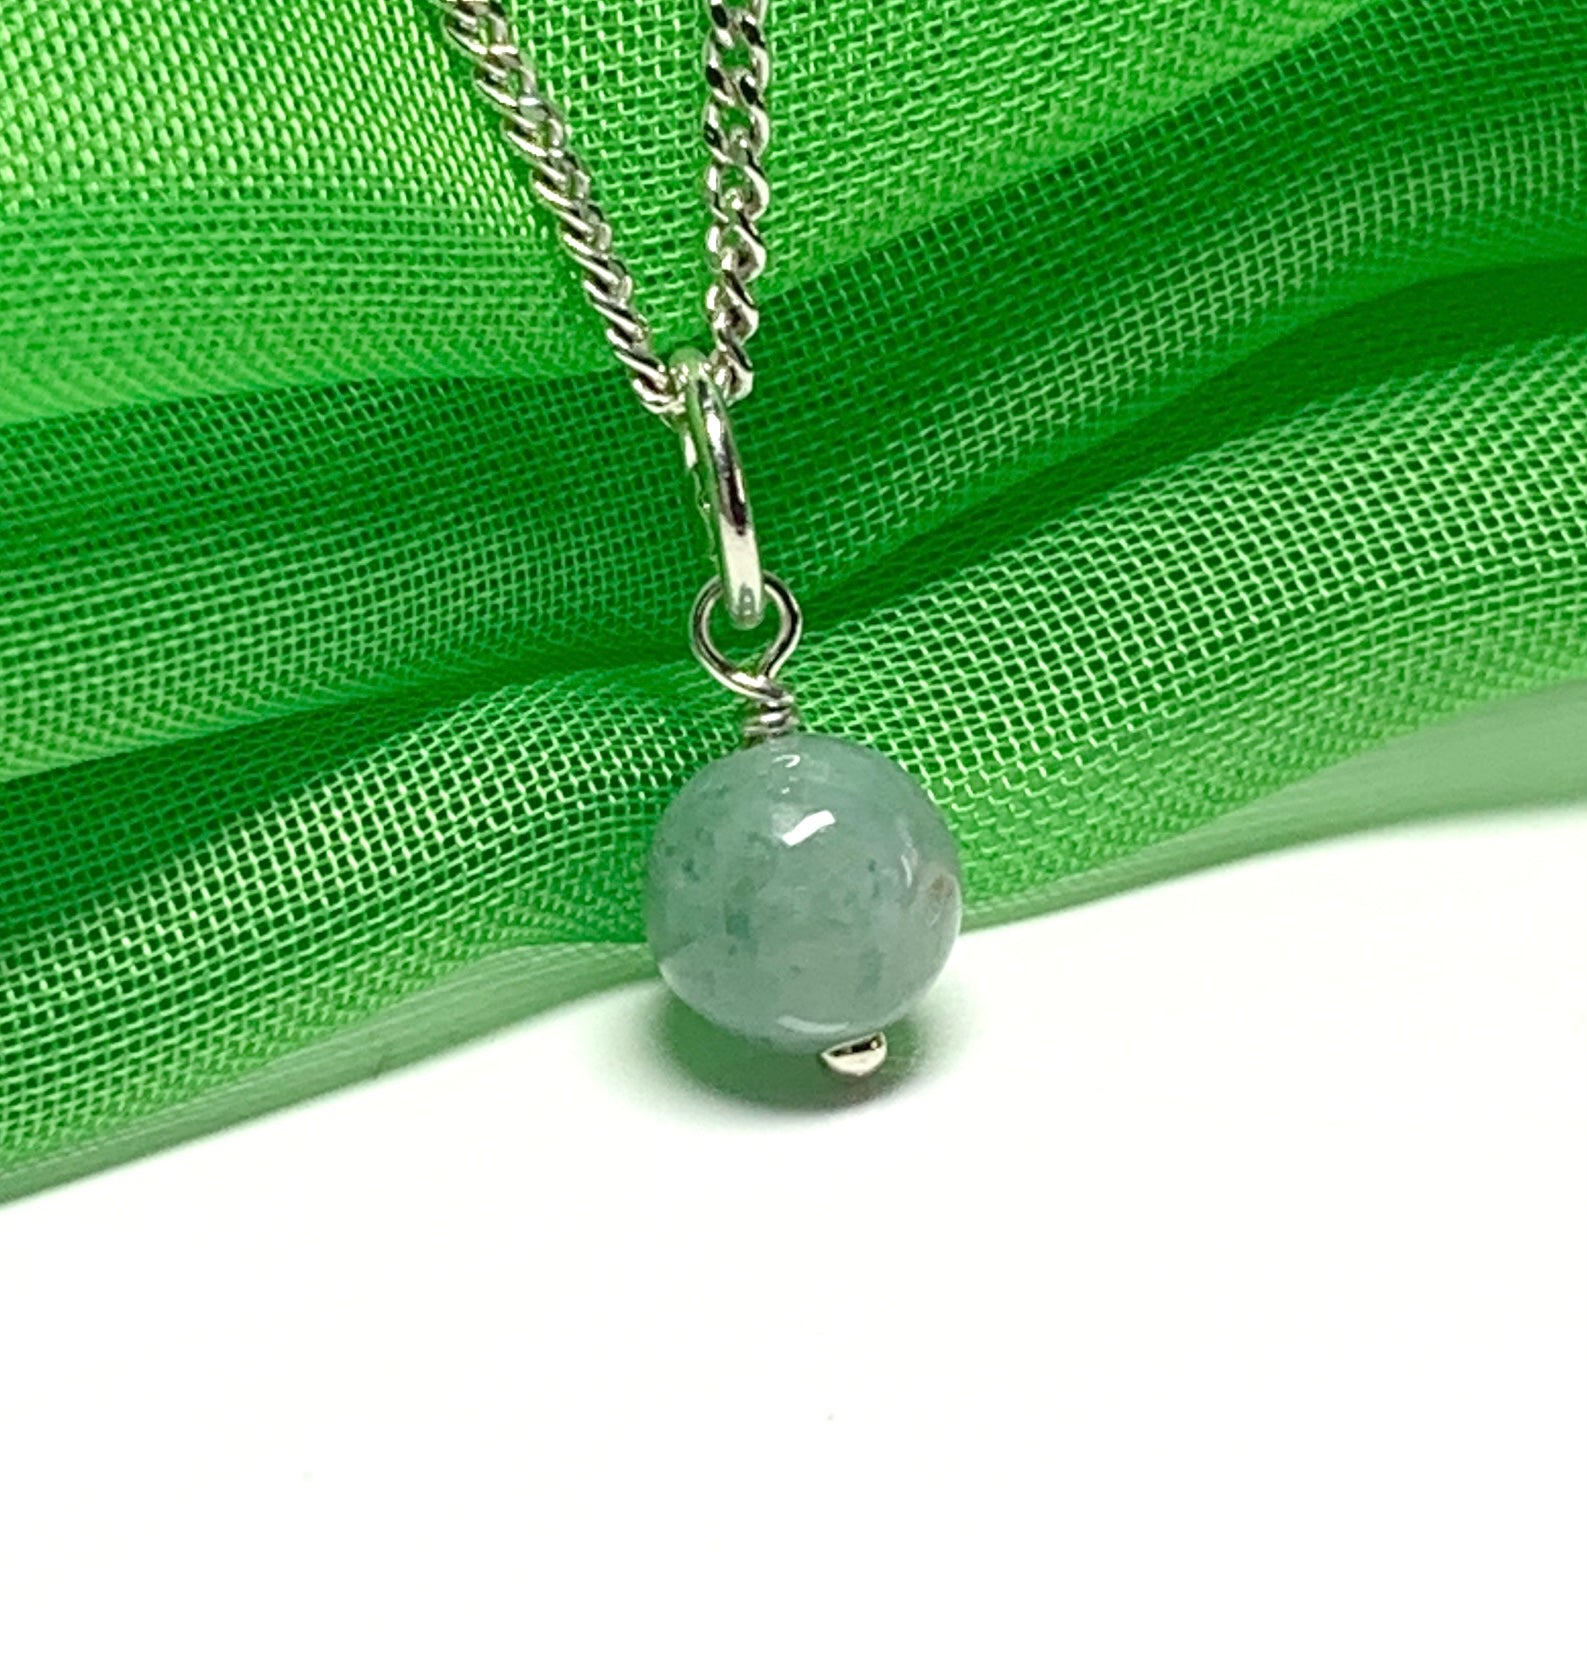 Small round real green jade necklace ball shaped pendant